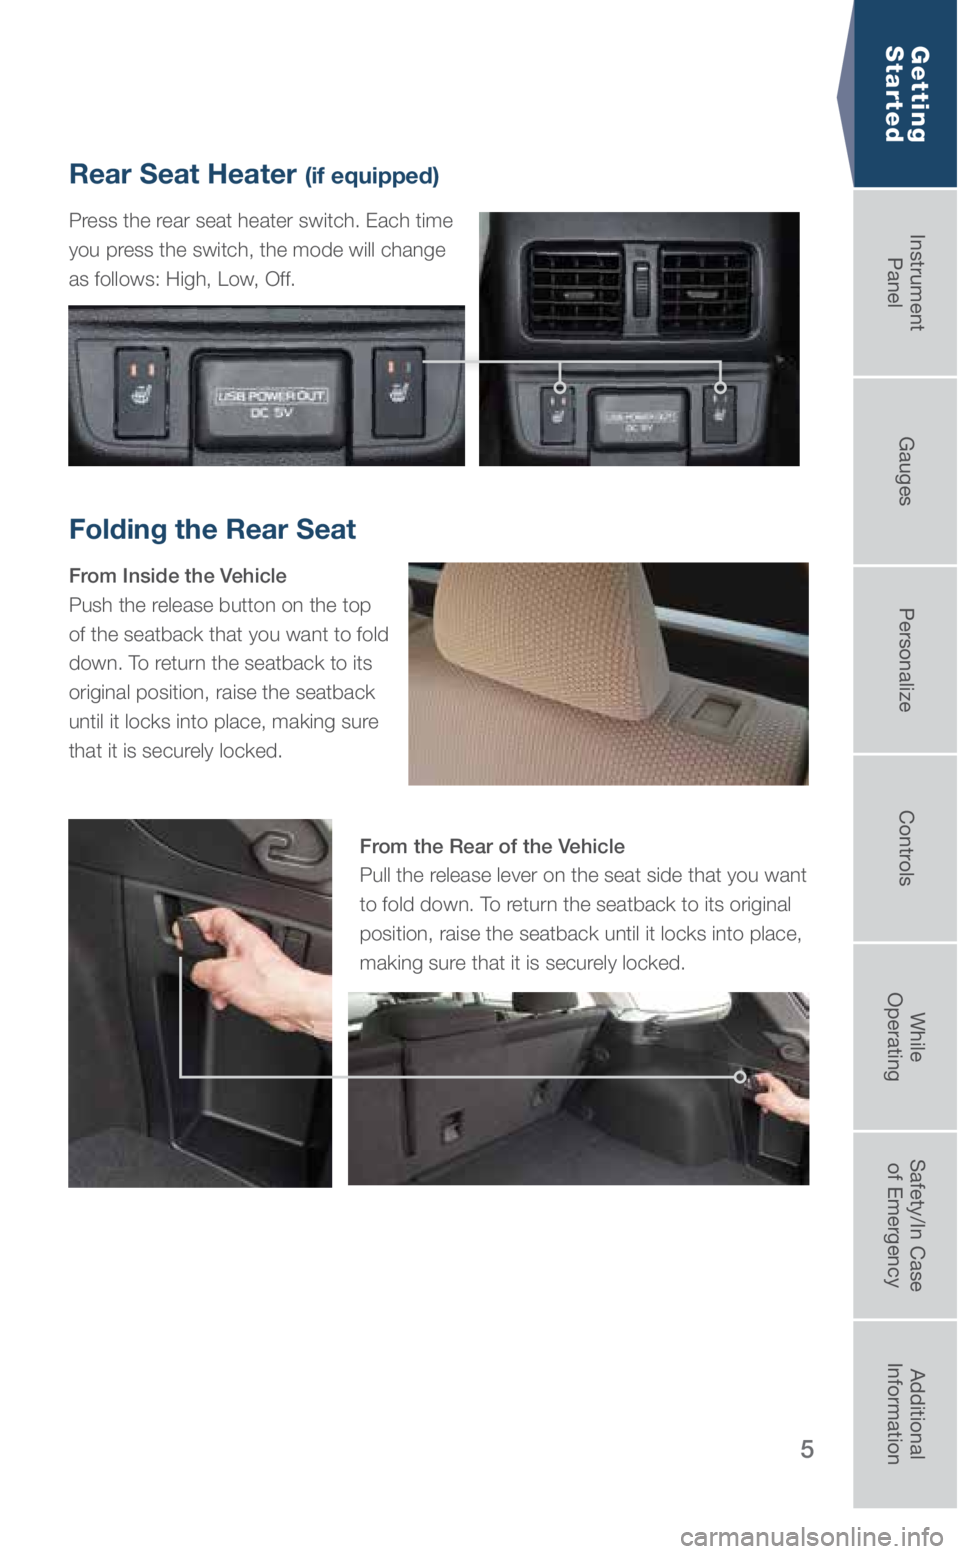 SUBARU OUTBACK 2018  Quick Guide 5
Folding the Rear Seat
From Inside the Vehicle
Push the release button on the top 
of the seatback that you want to fold 
down. To return the seatback to its 
original position, raise the seatback 
u